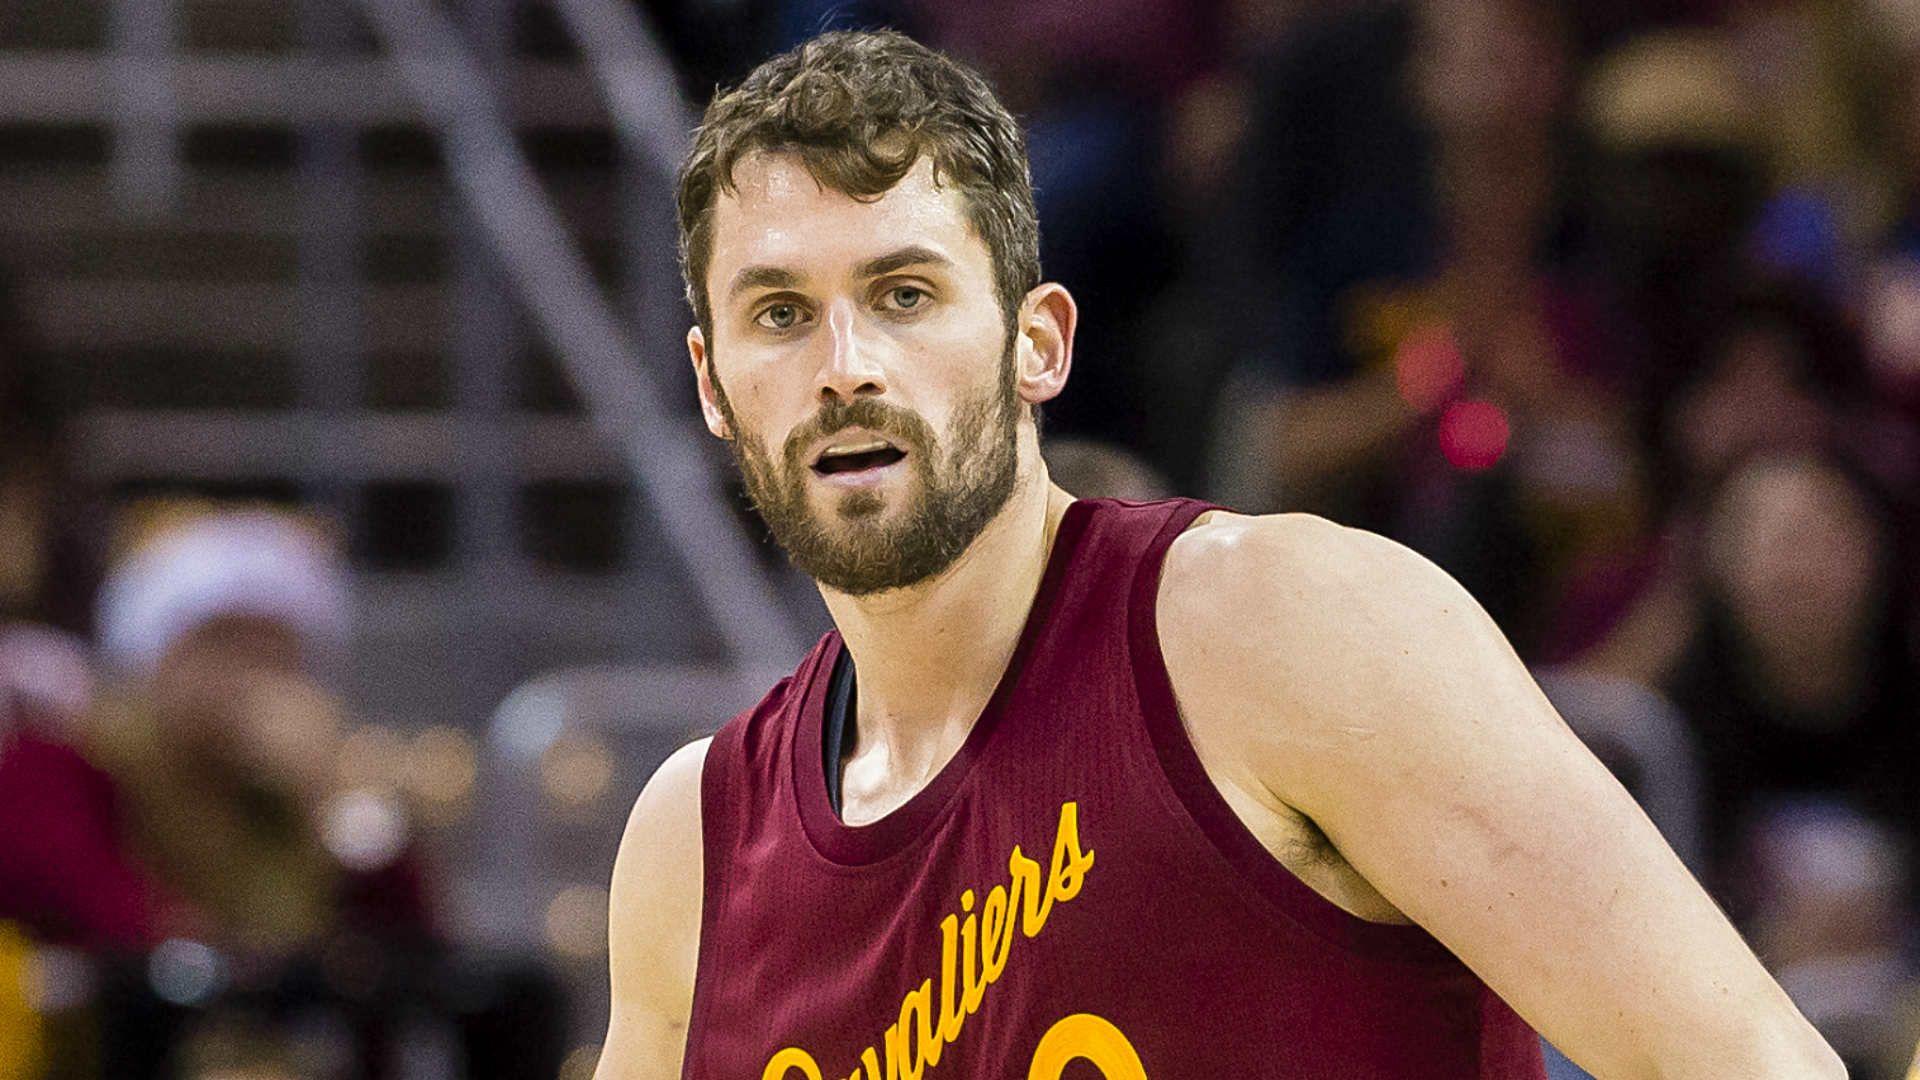 Cavaliers' Kevin Love: 'I'll fit in when I come back'. NBA